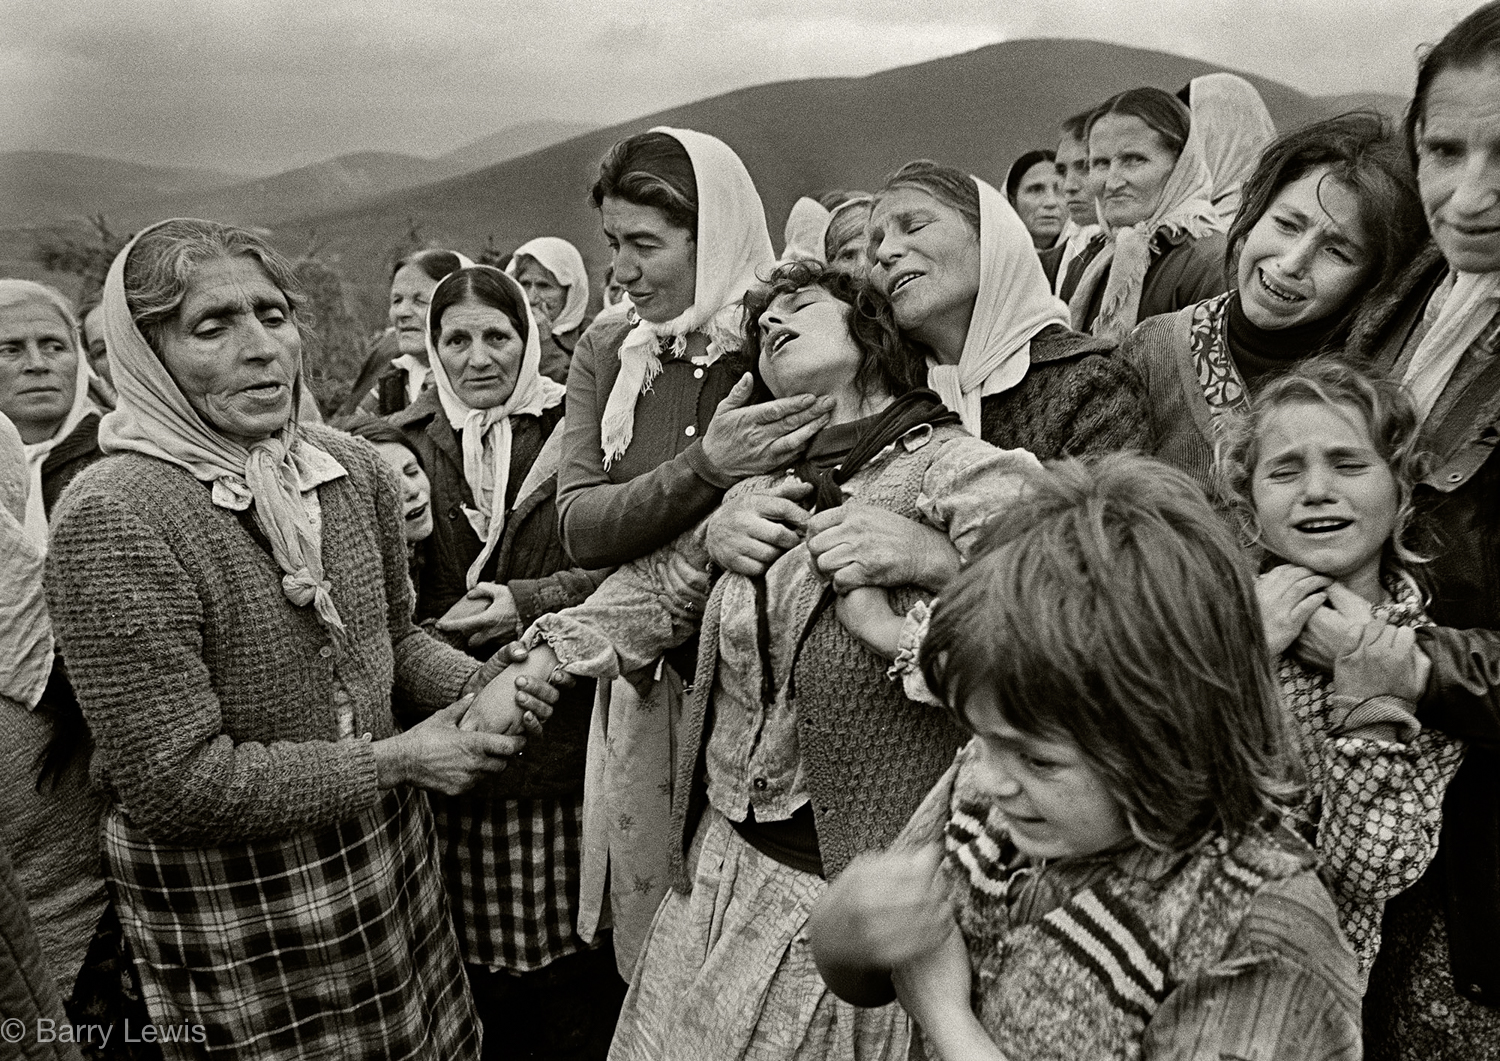  The Muslem funeral of 23 year old Baghkim Sinani in the mountain village of Kalimash, in the mountains of High Albania, 1991. 